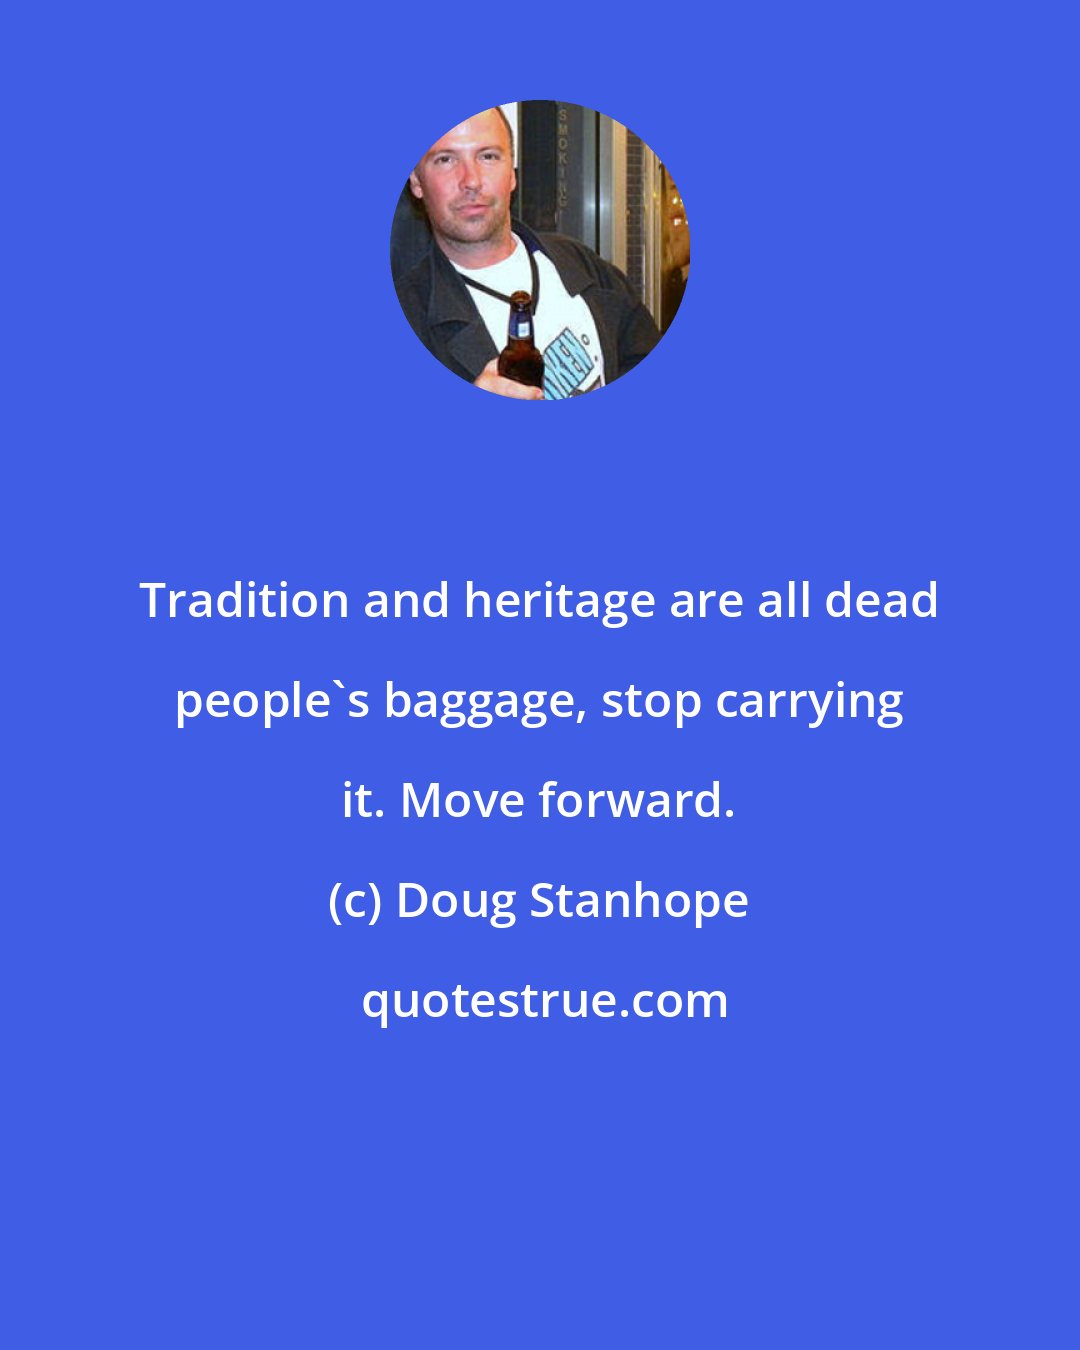 Doug Stanhope: Tradition and heritage are all dead people's baggage, stop carrying it. Move forward.